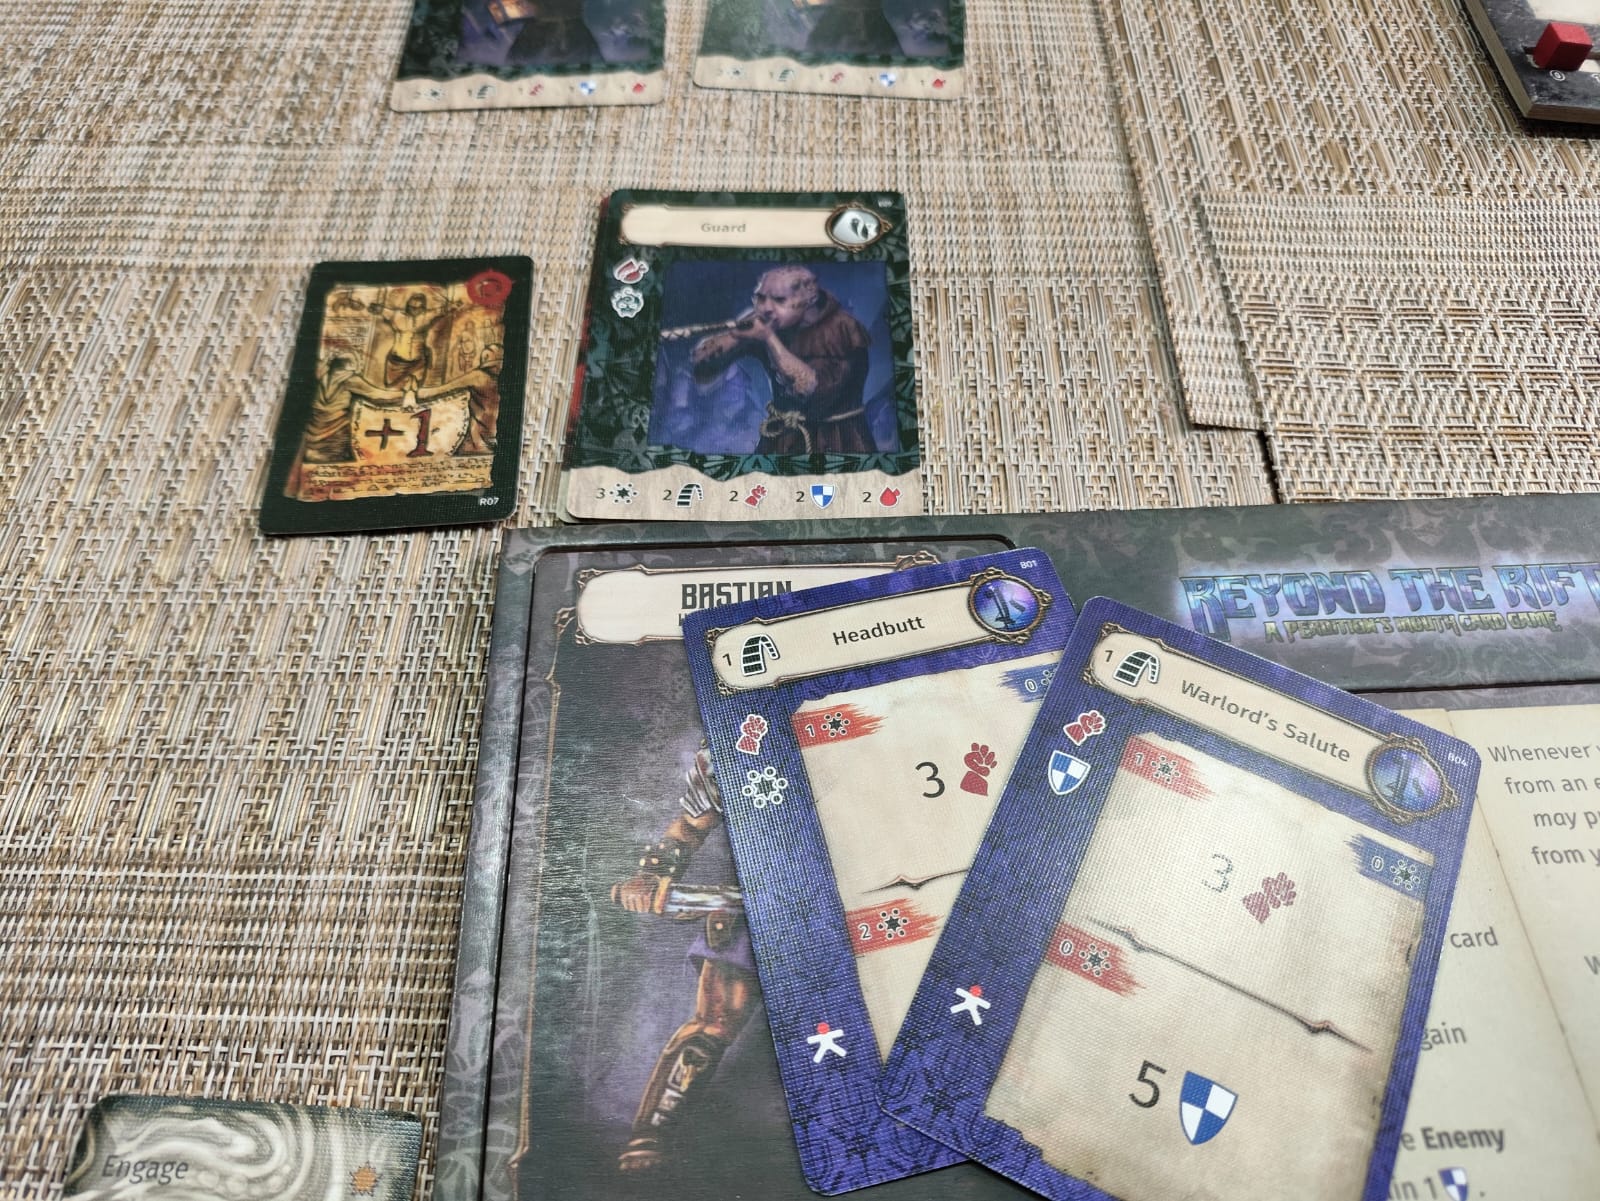 Reseña Beyond the Rift: A Perdition's Mouth Card Game 5